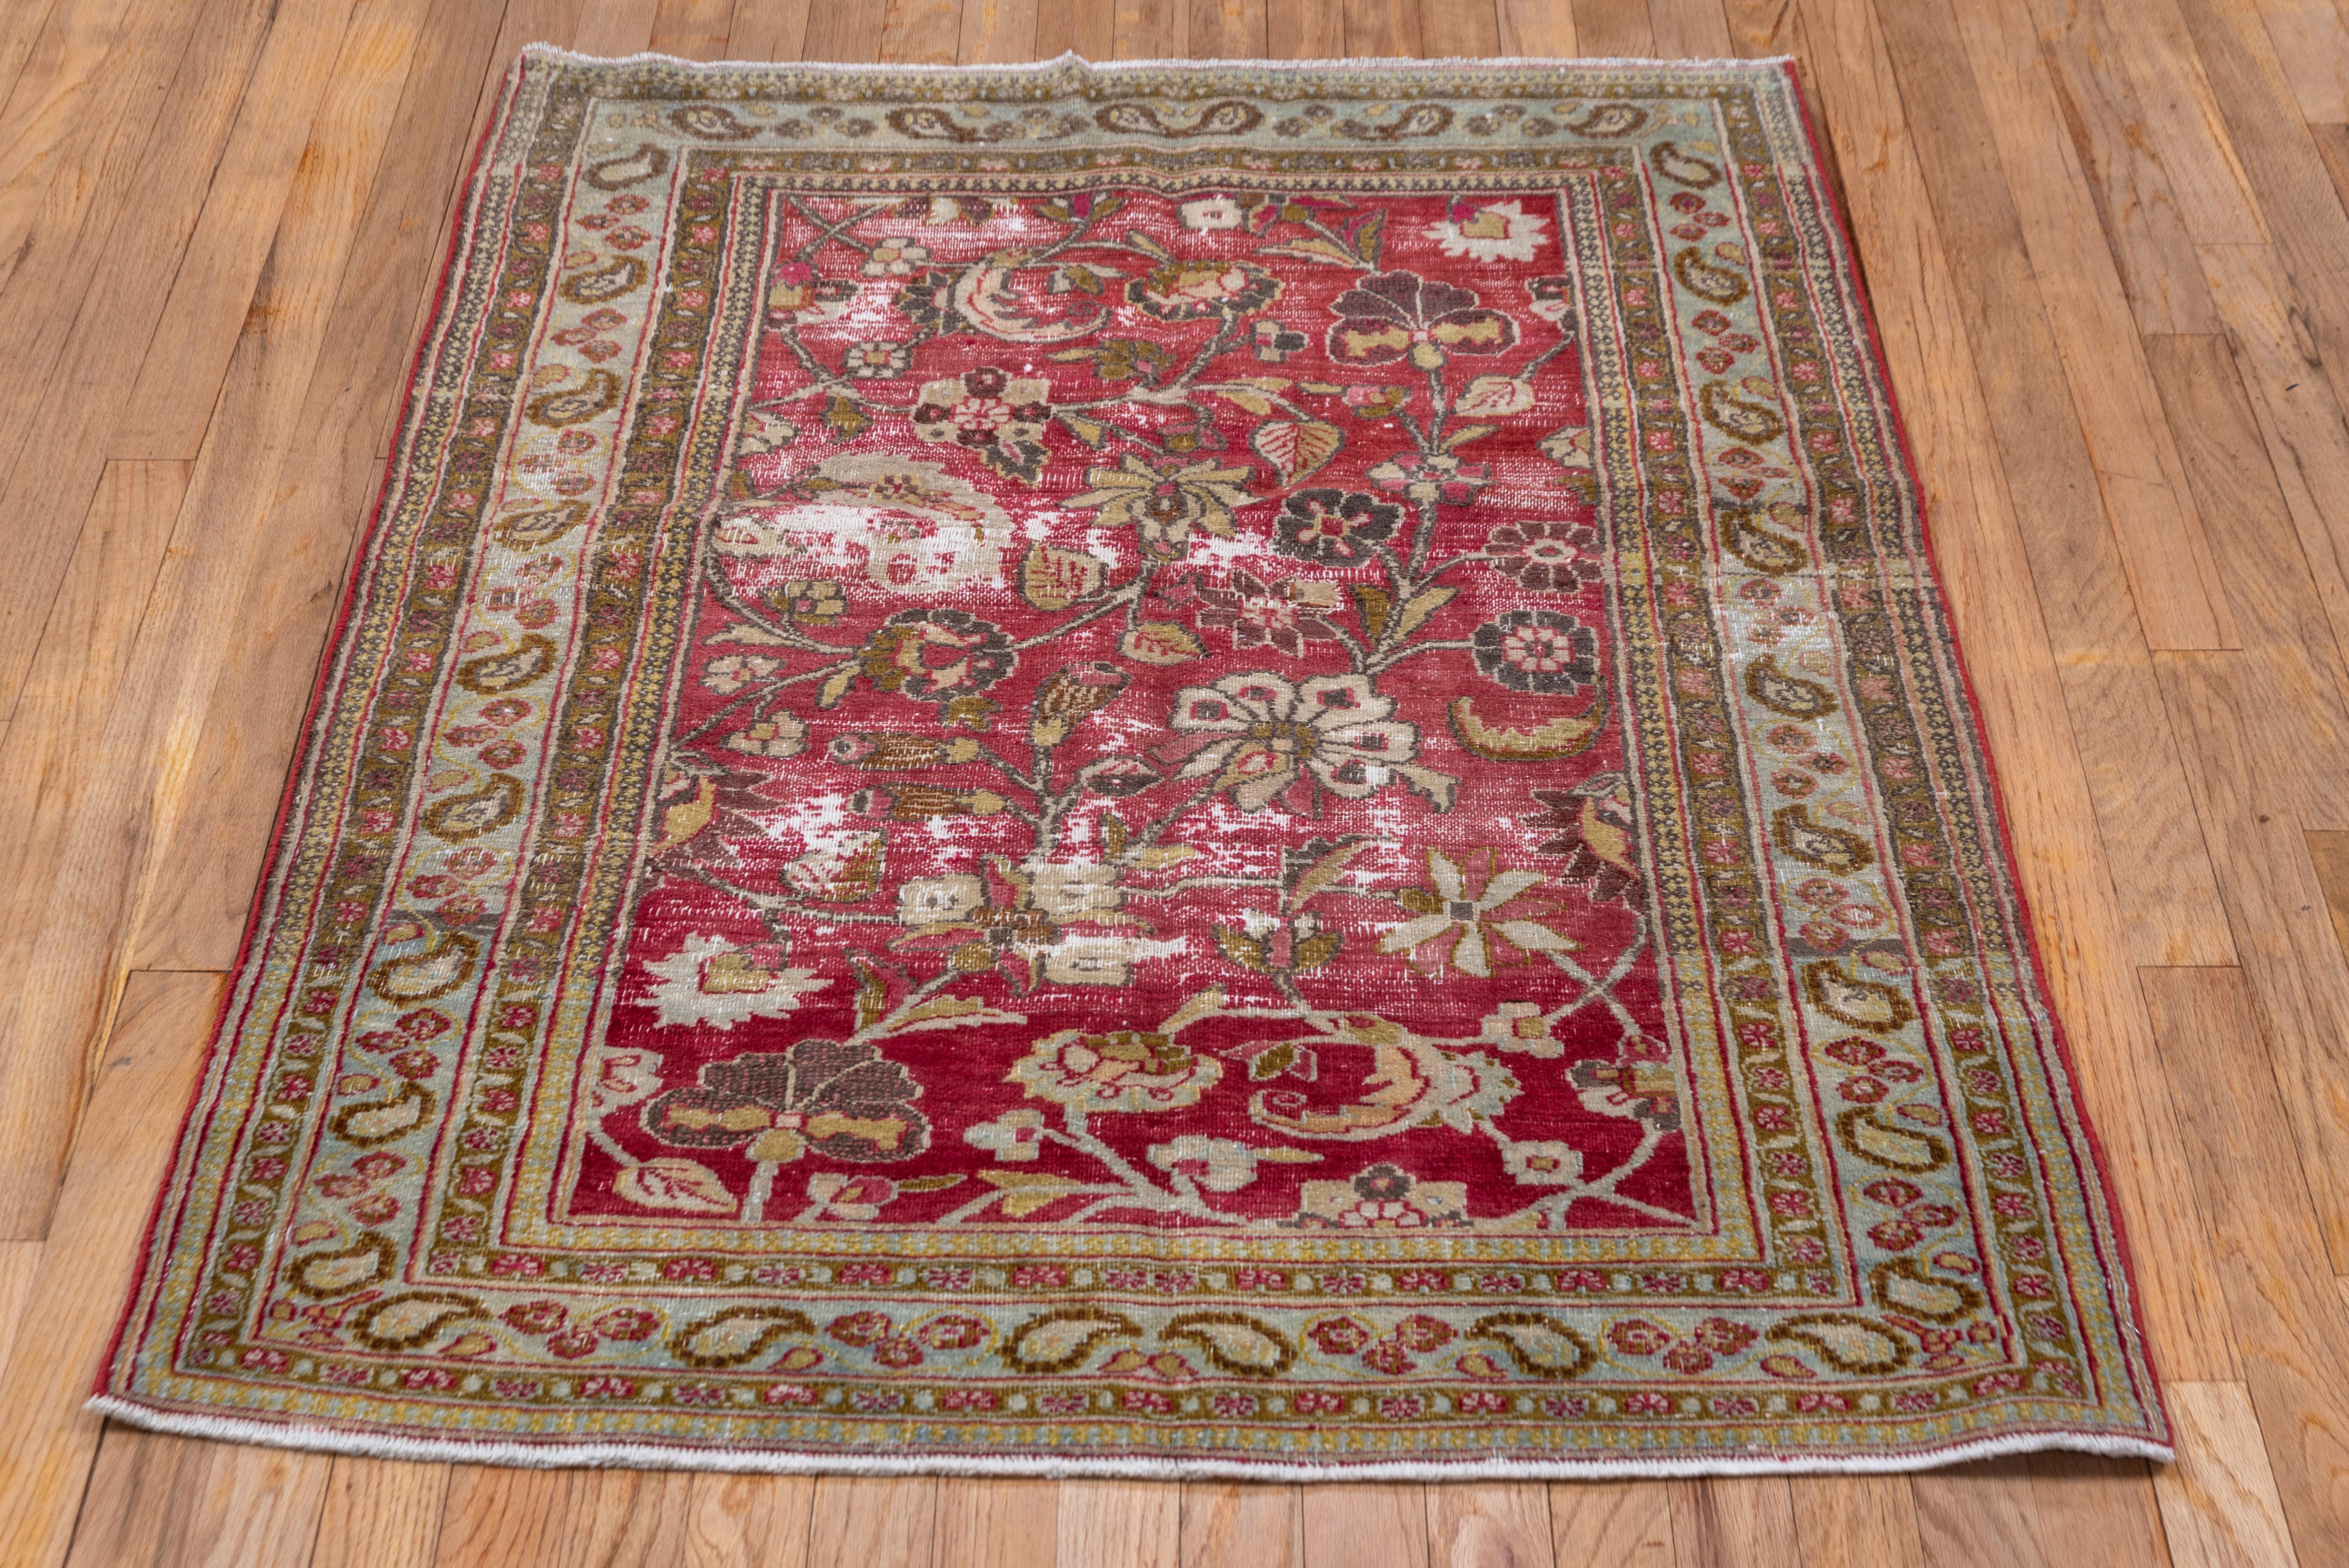 Early 20th Century Shabby Chic Persian Khorassan Rug, Raspberry Field, Seafoam & Olive Borders For Sale